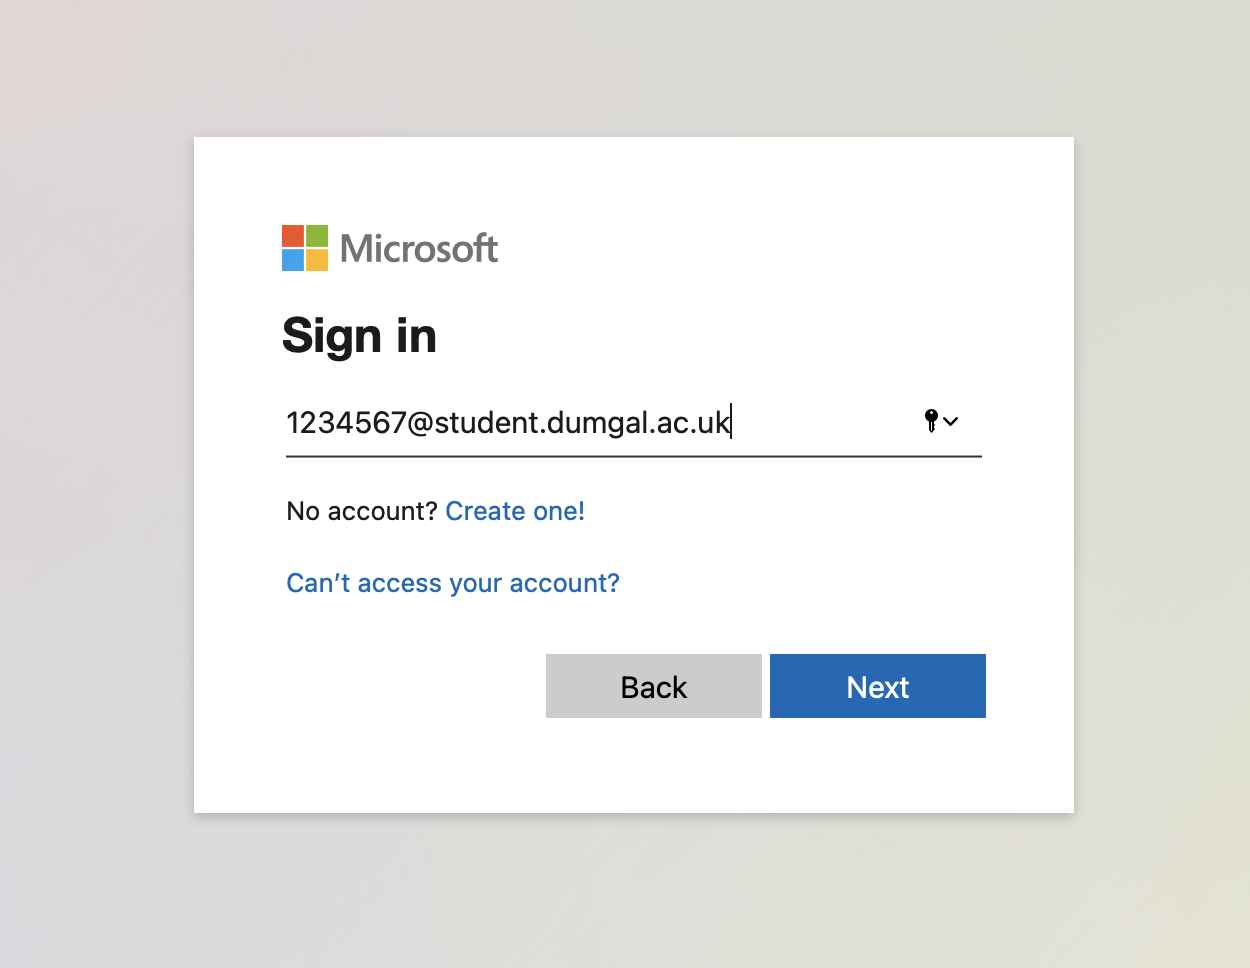 Scrrenshot of the microsoft login form with 1234567@student.dumgal.ac.uk written in the email field.